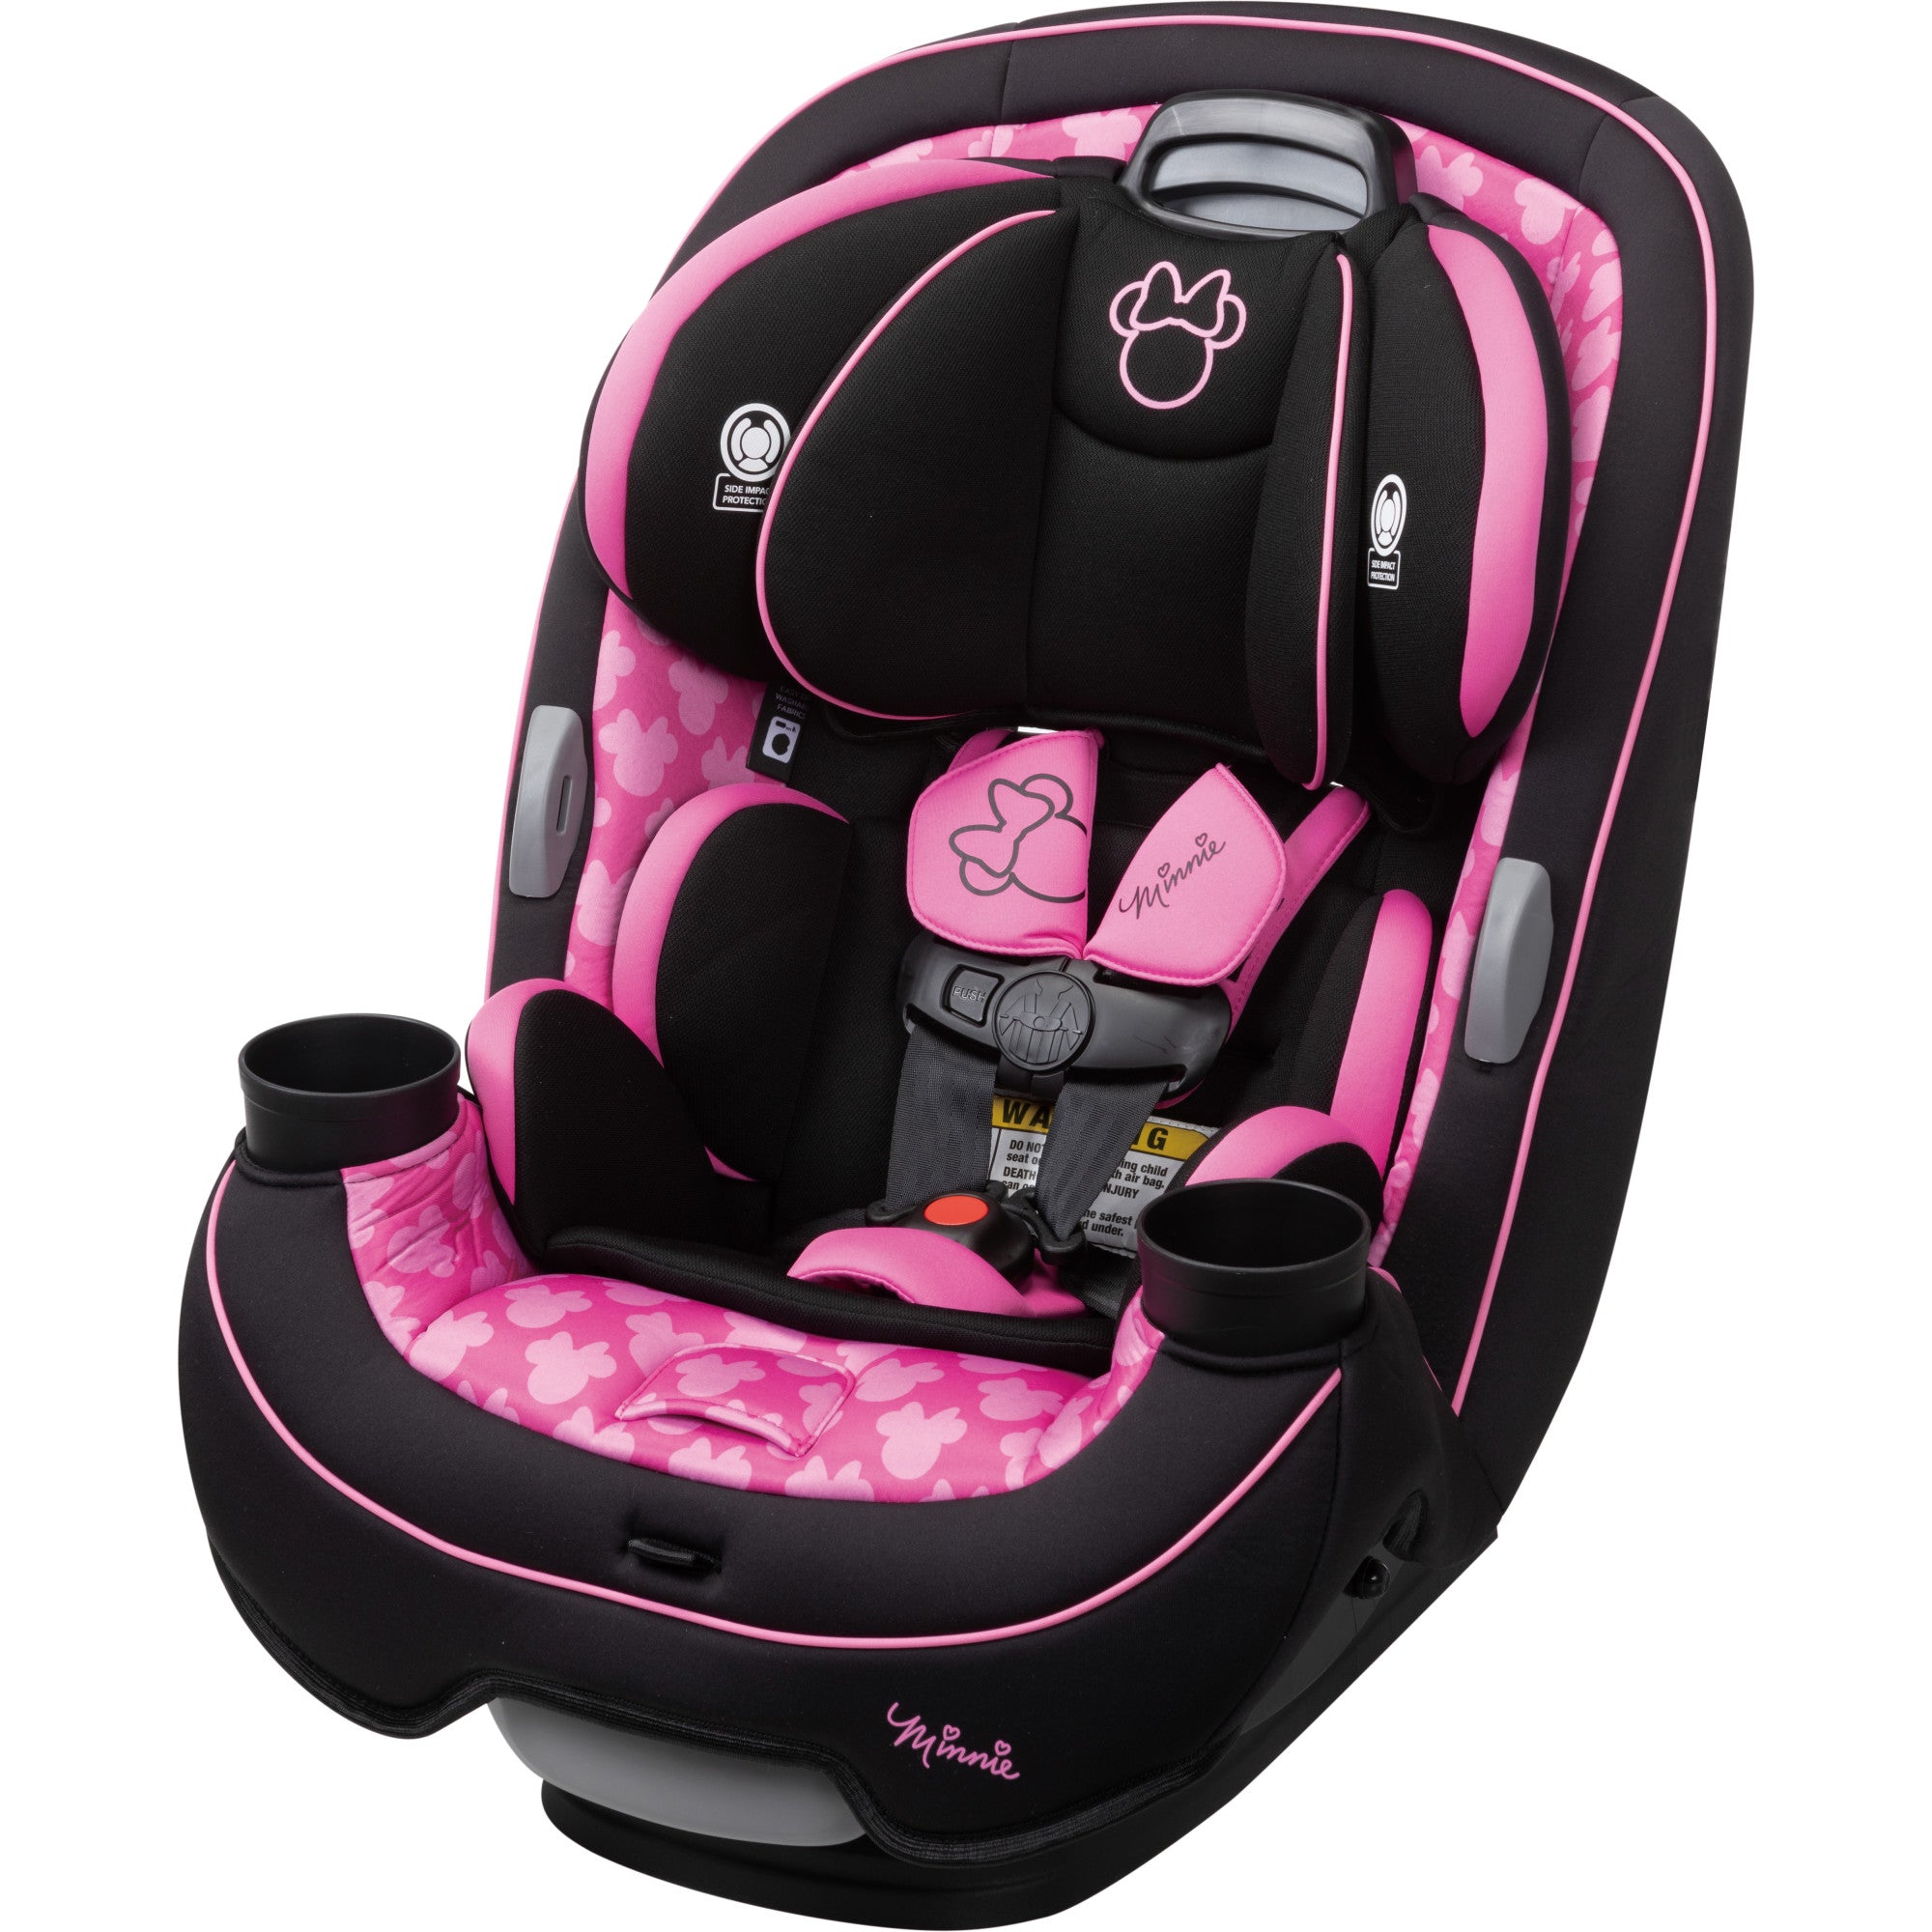 Disney Baby Grow and Go™ All-in-One Convertible Car Seat - Simply Minnie